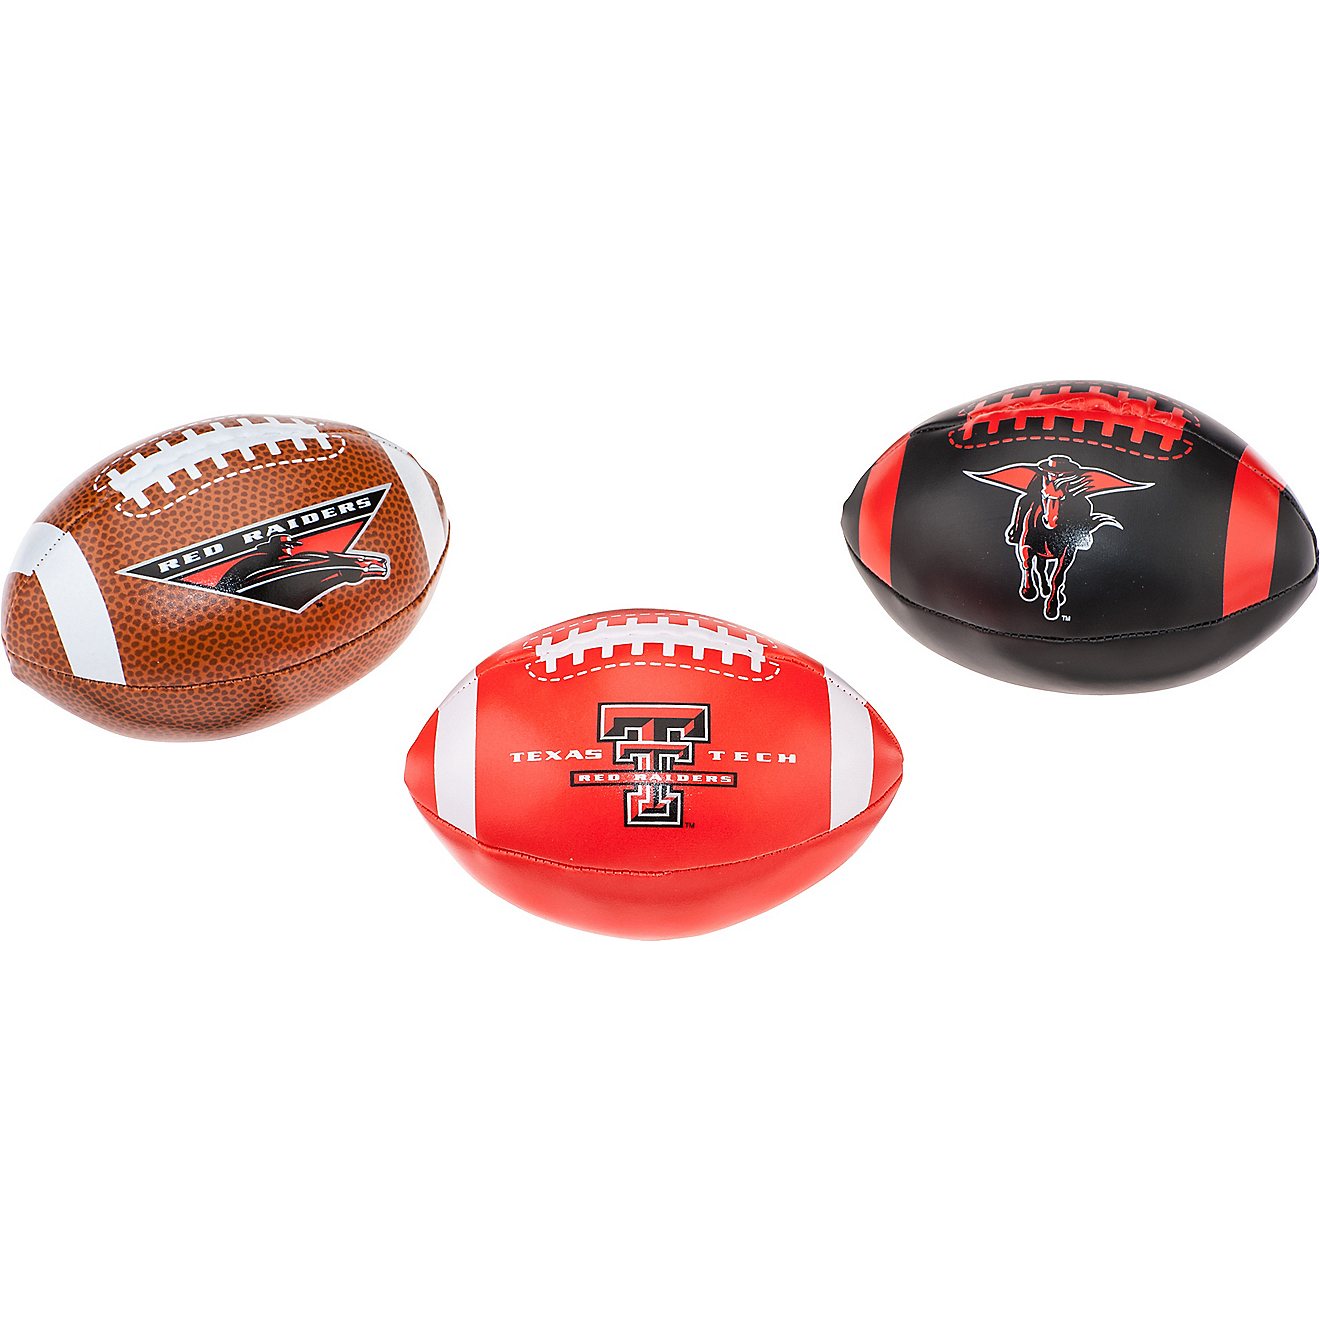 Rawlings Texas Tech University 3rd Down Softee Footballs 3-Pack                                                                  - view number 1